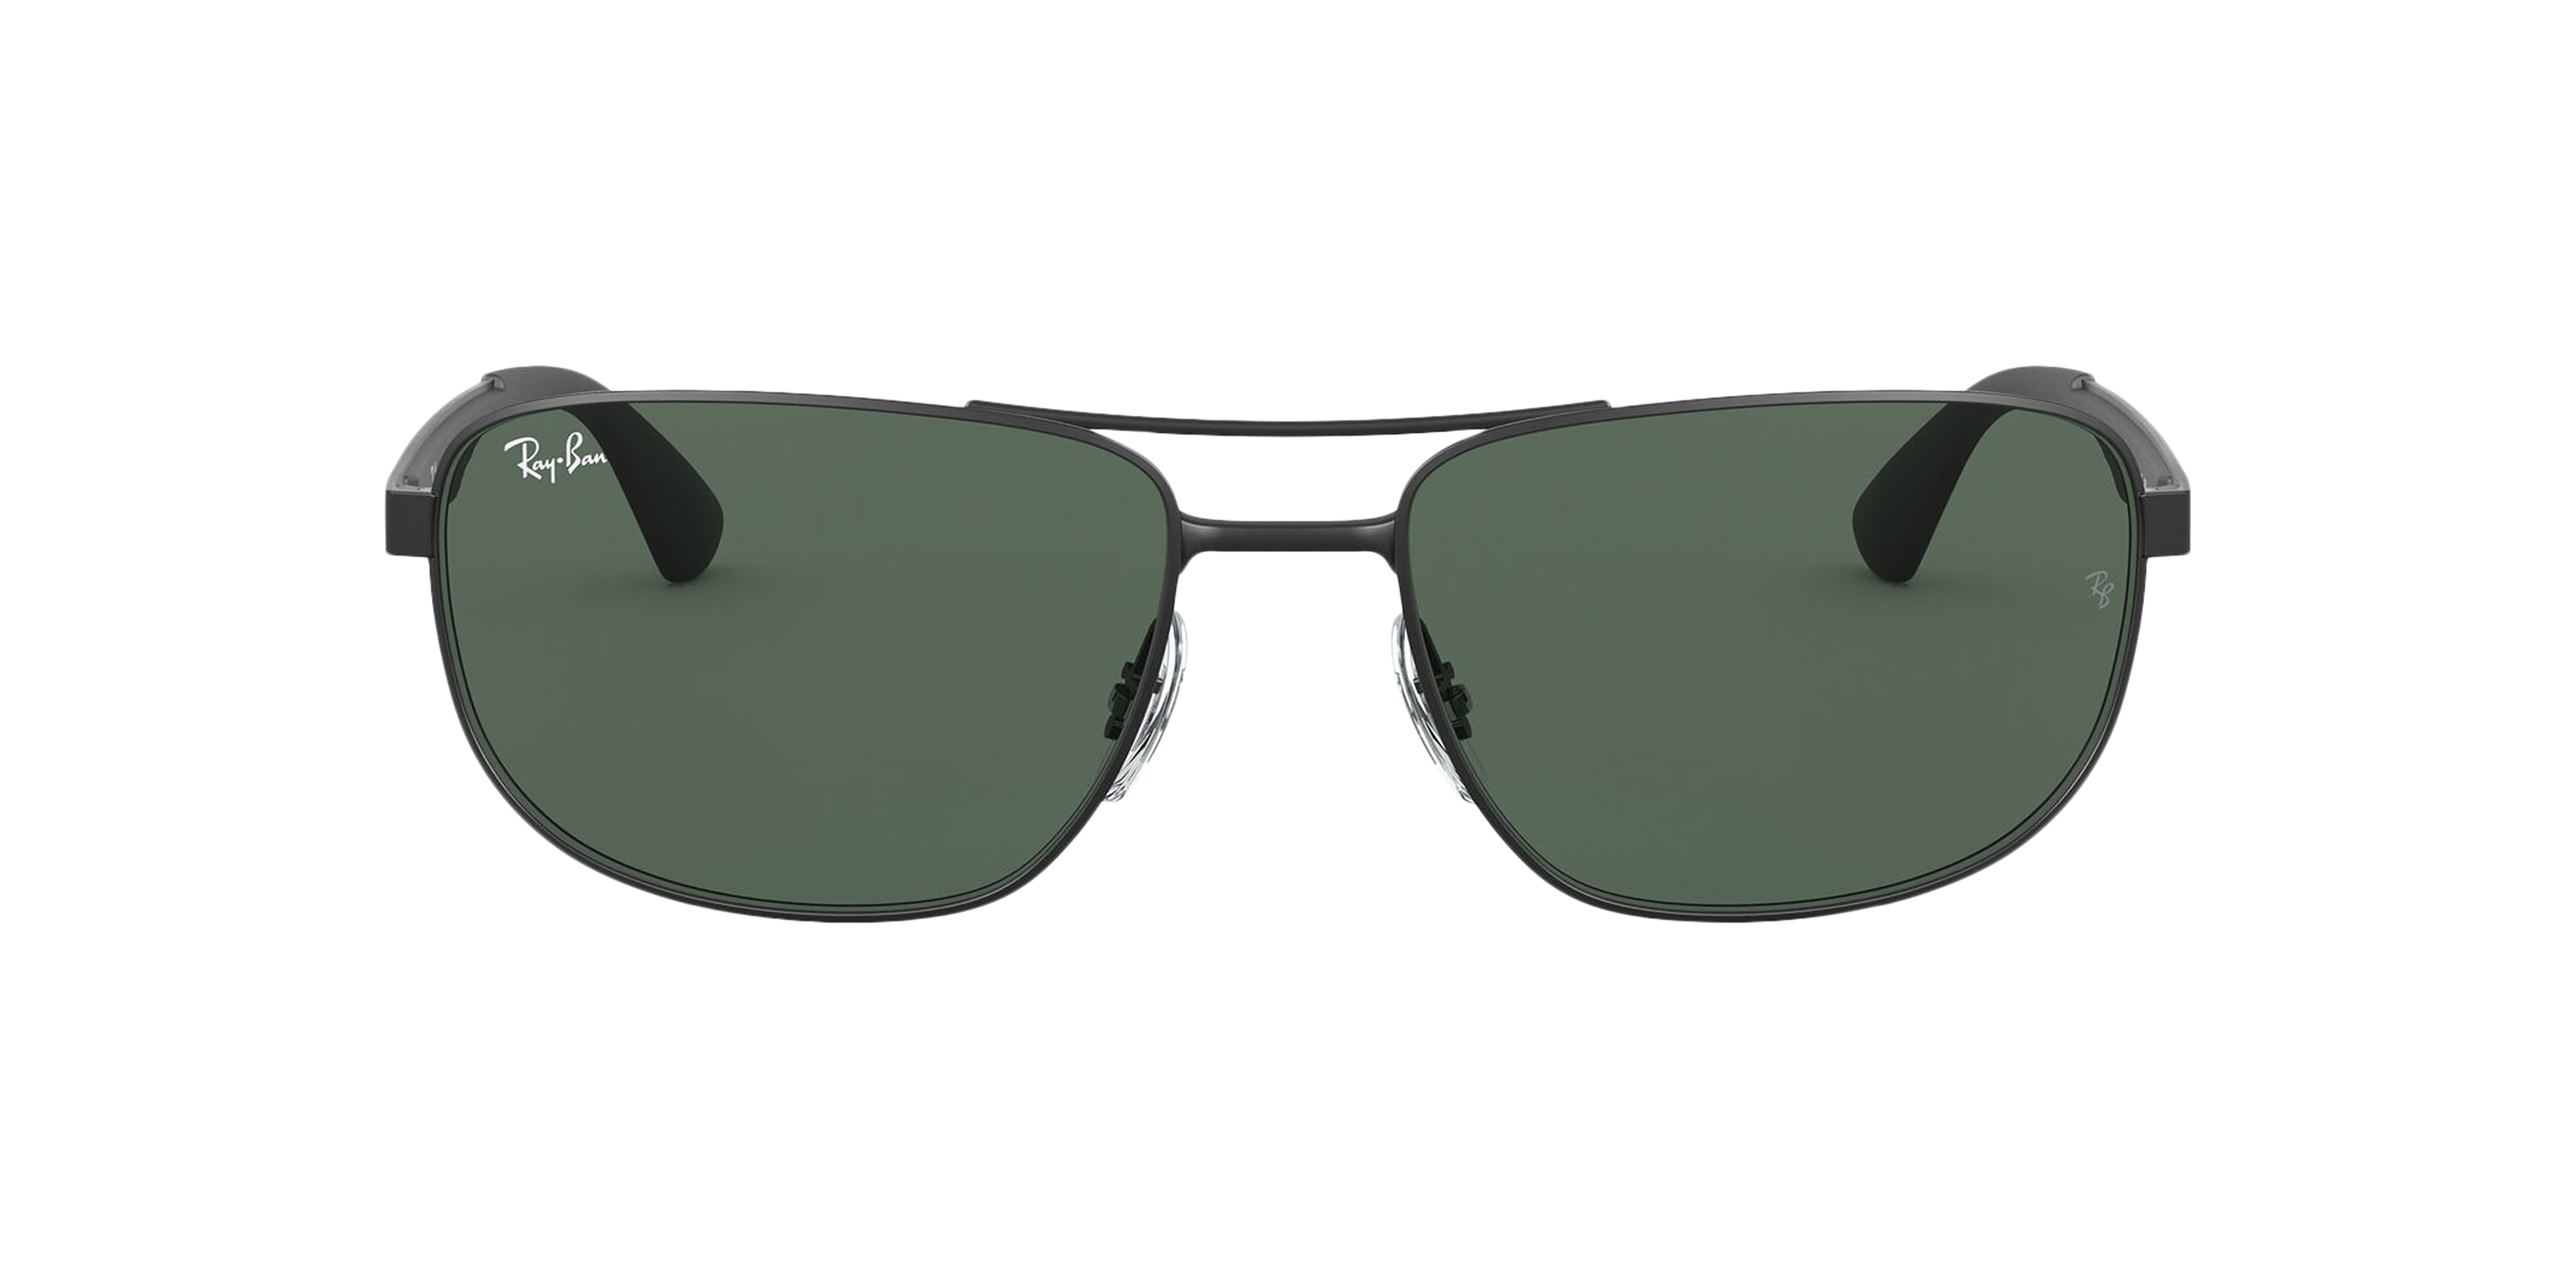 [products.image.front] Ray-Ban RB3528 006/71